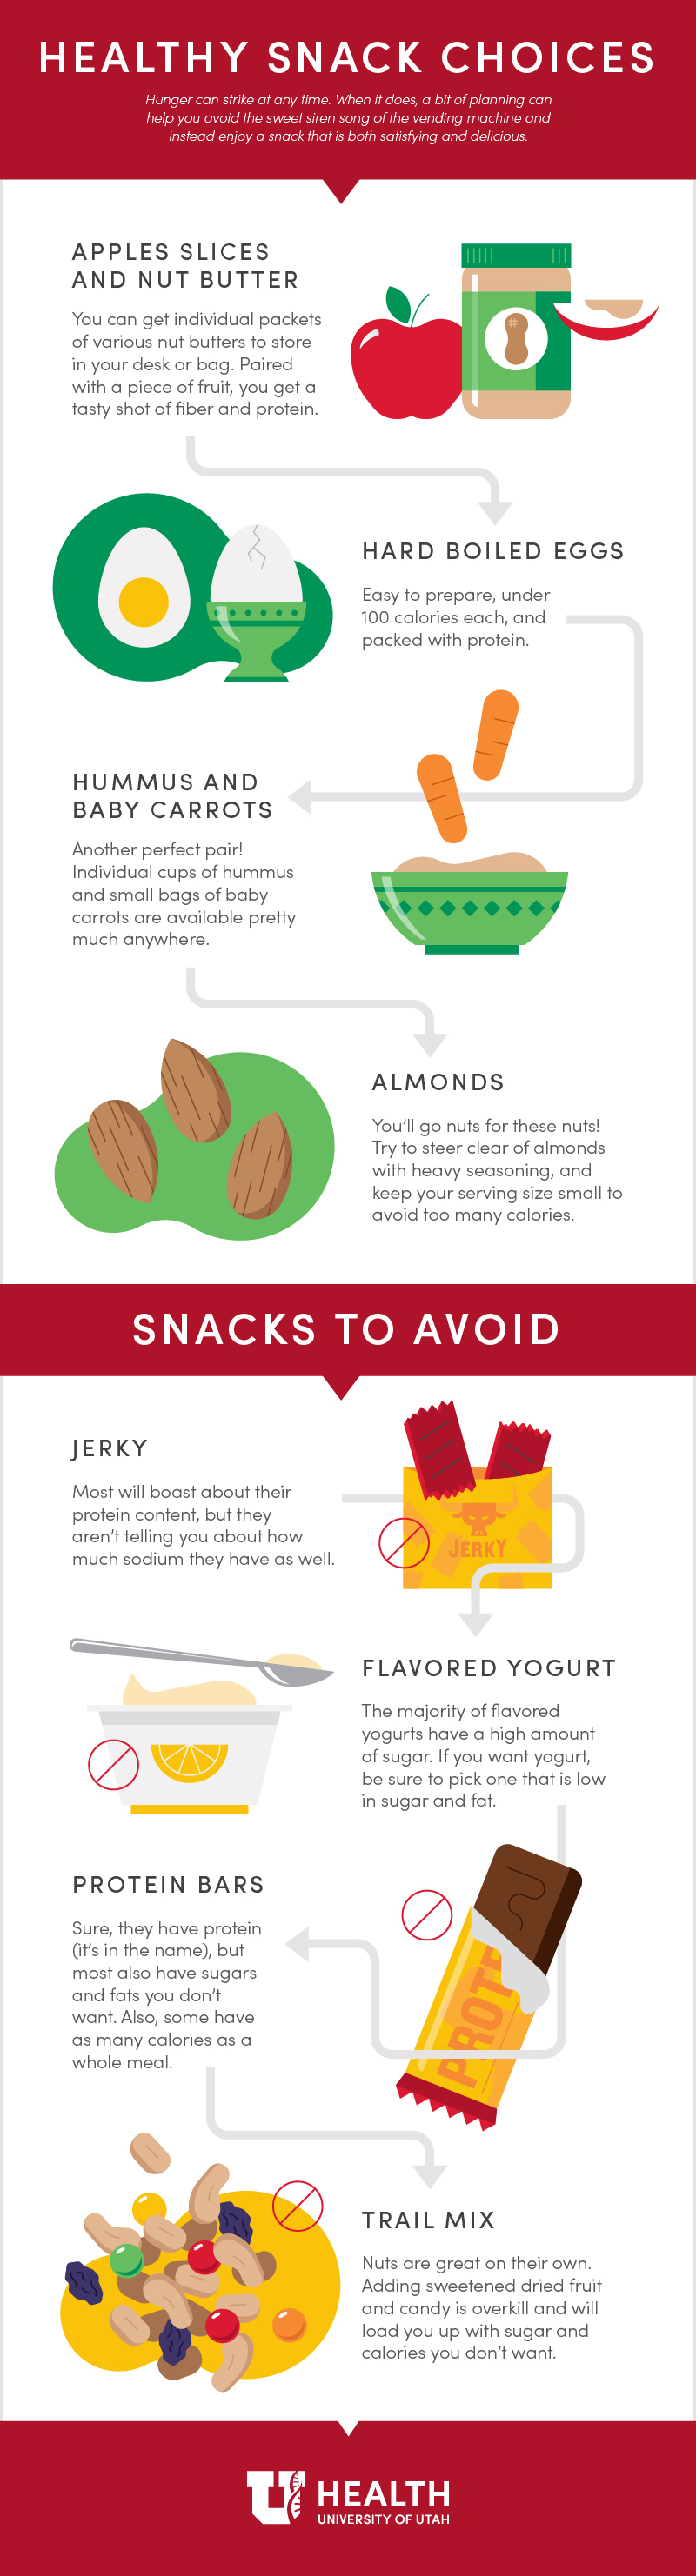 Healthy Snack Choices